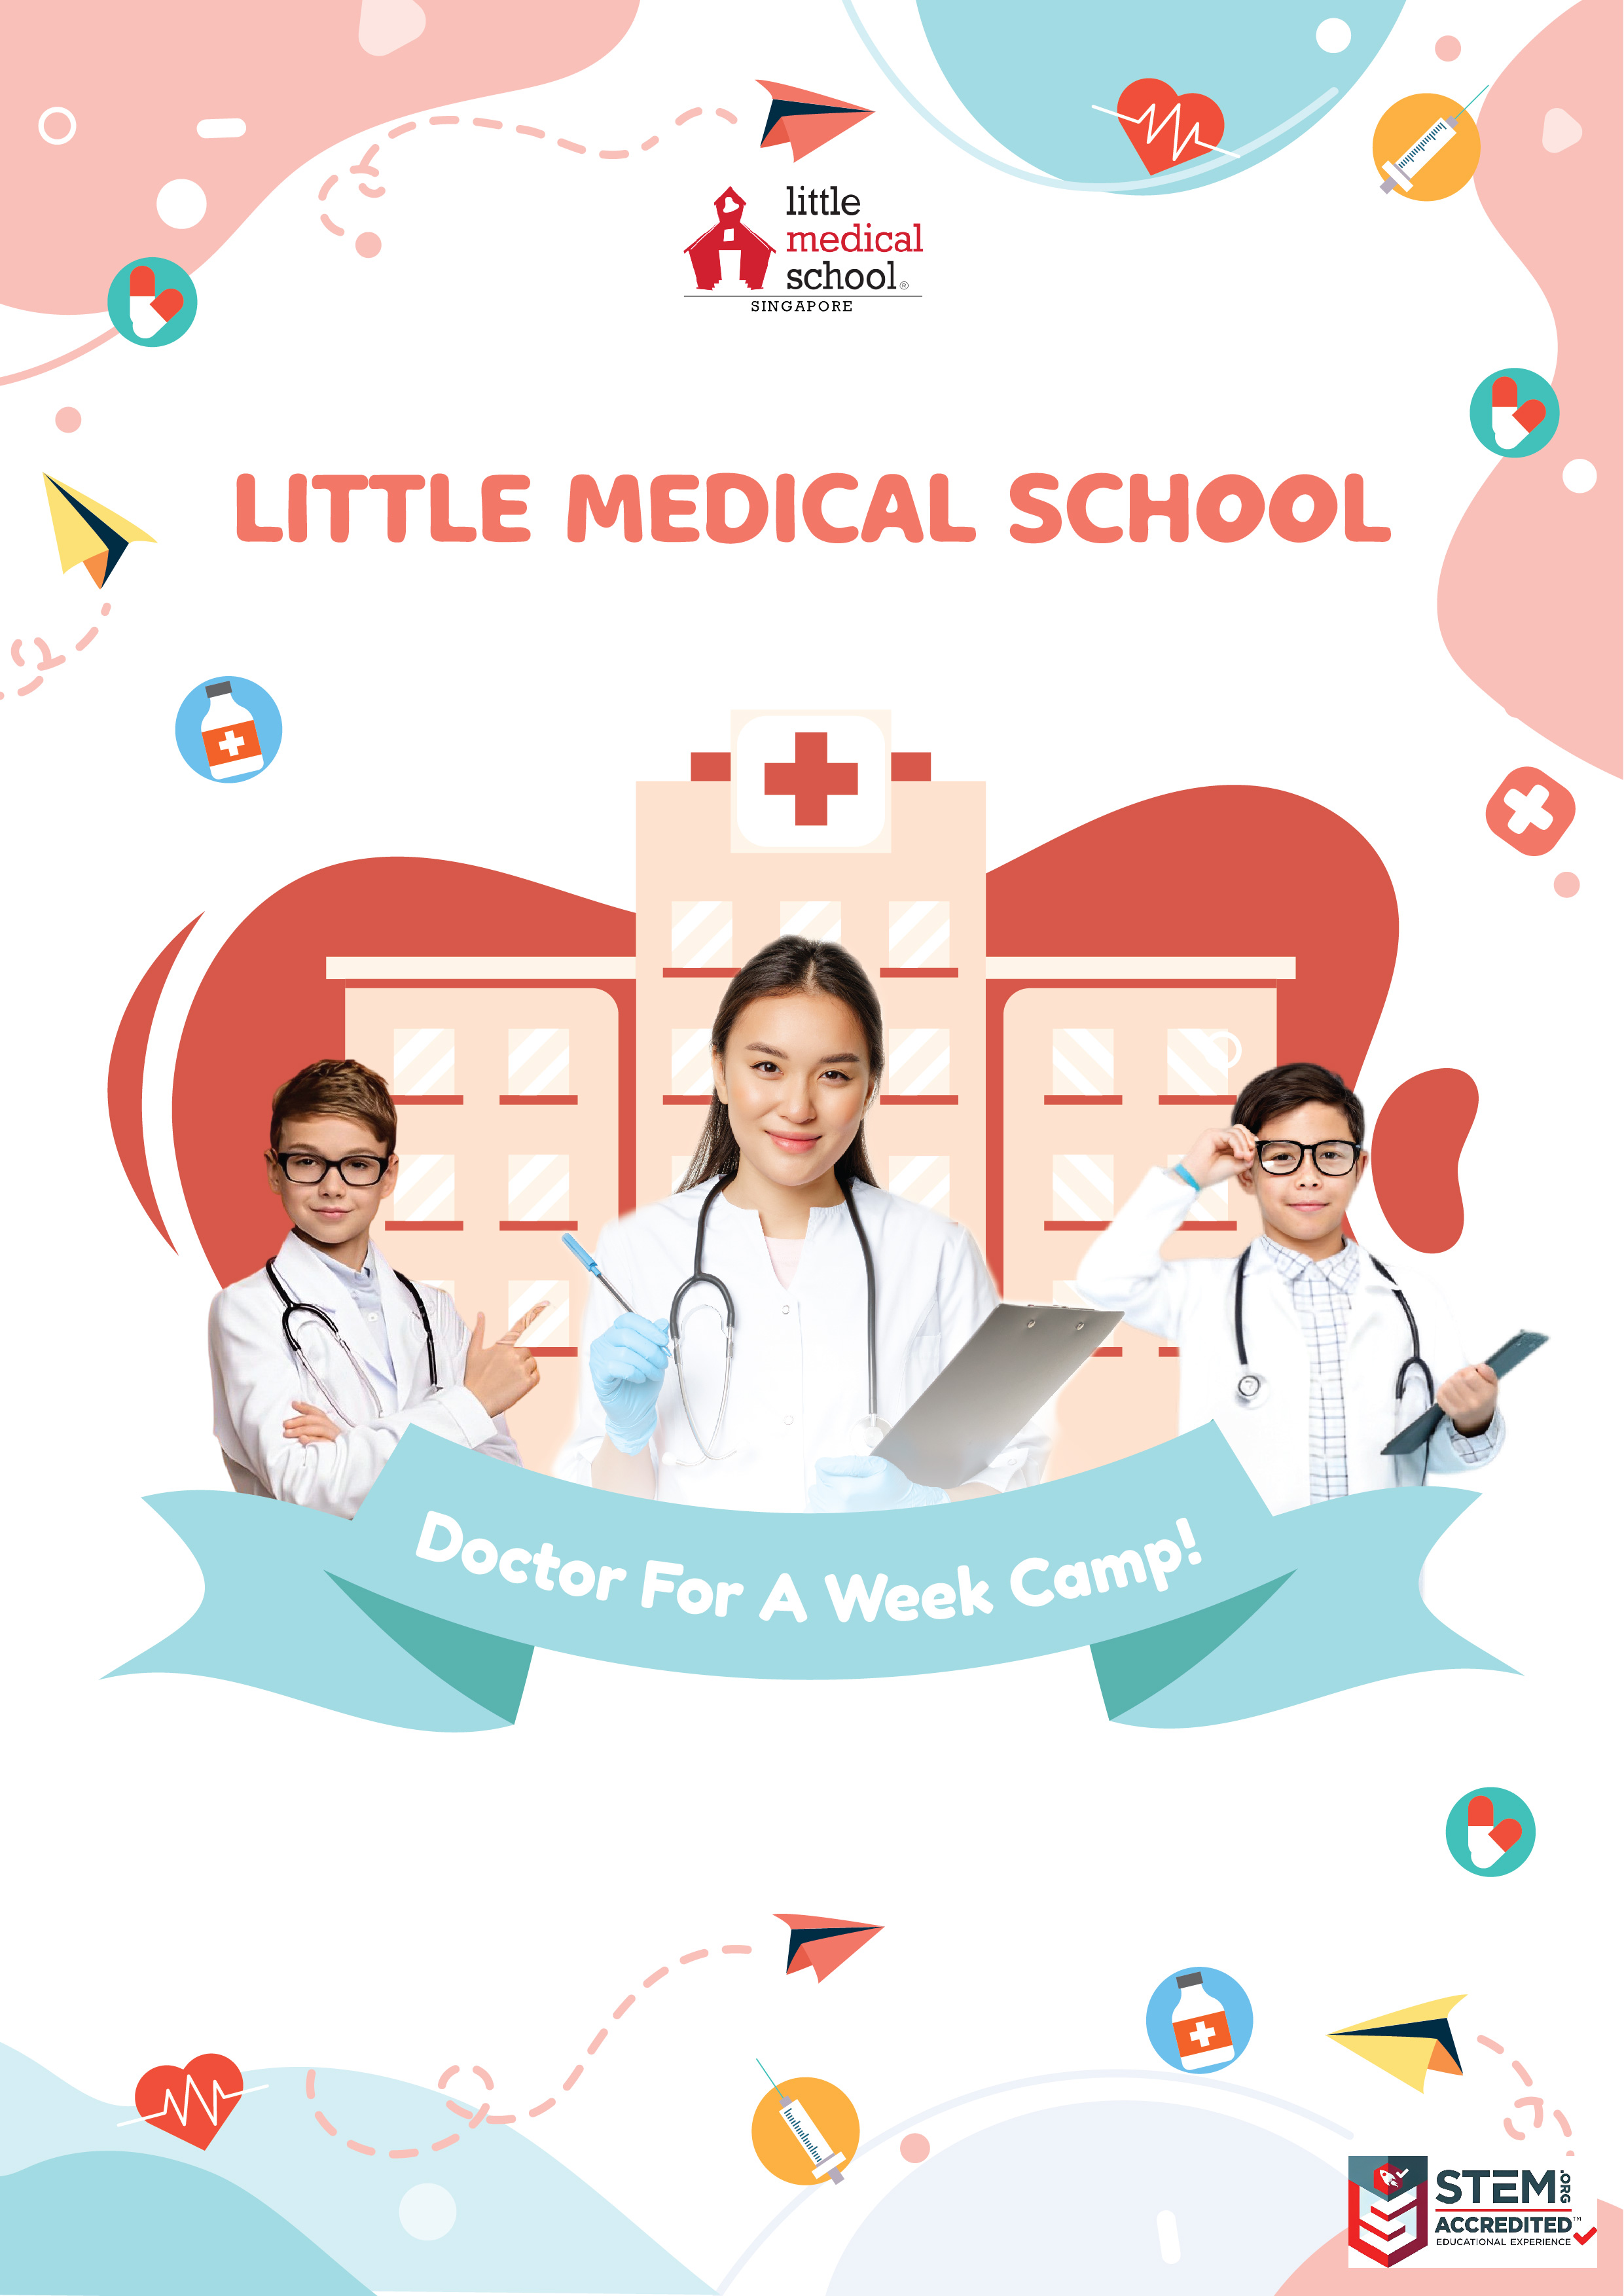 Little Medical School SG Launches Fun-Filled “Doctor For A Week” Camp for Early Career Guidance